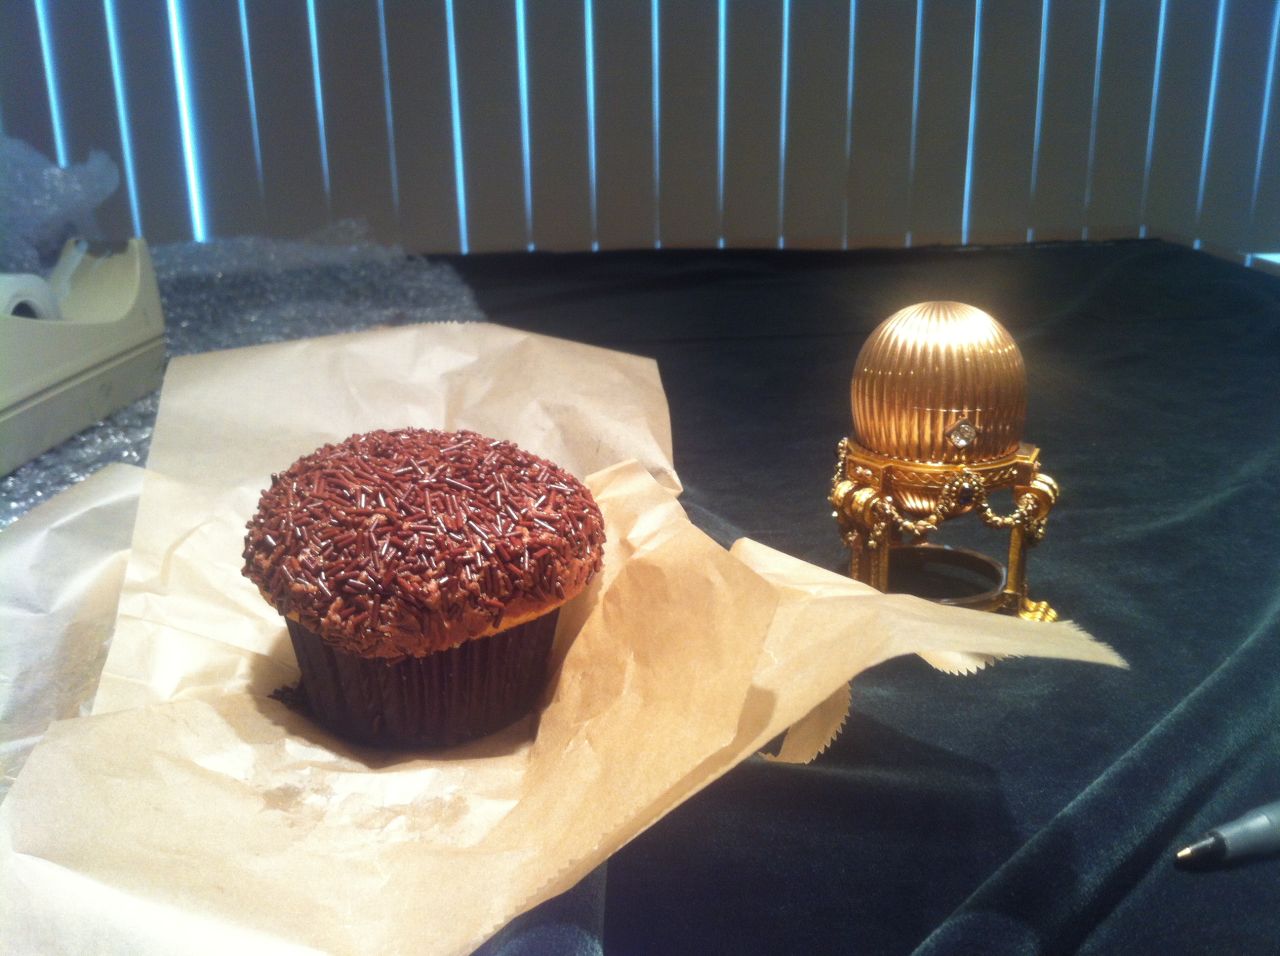 The Third Imperial Egg as seen by Faberge expert Kieran McCarthy for the first time in the United States. The cupcake beside it demonstrates the egg's delicacy.